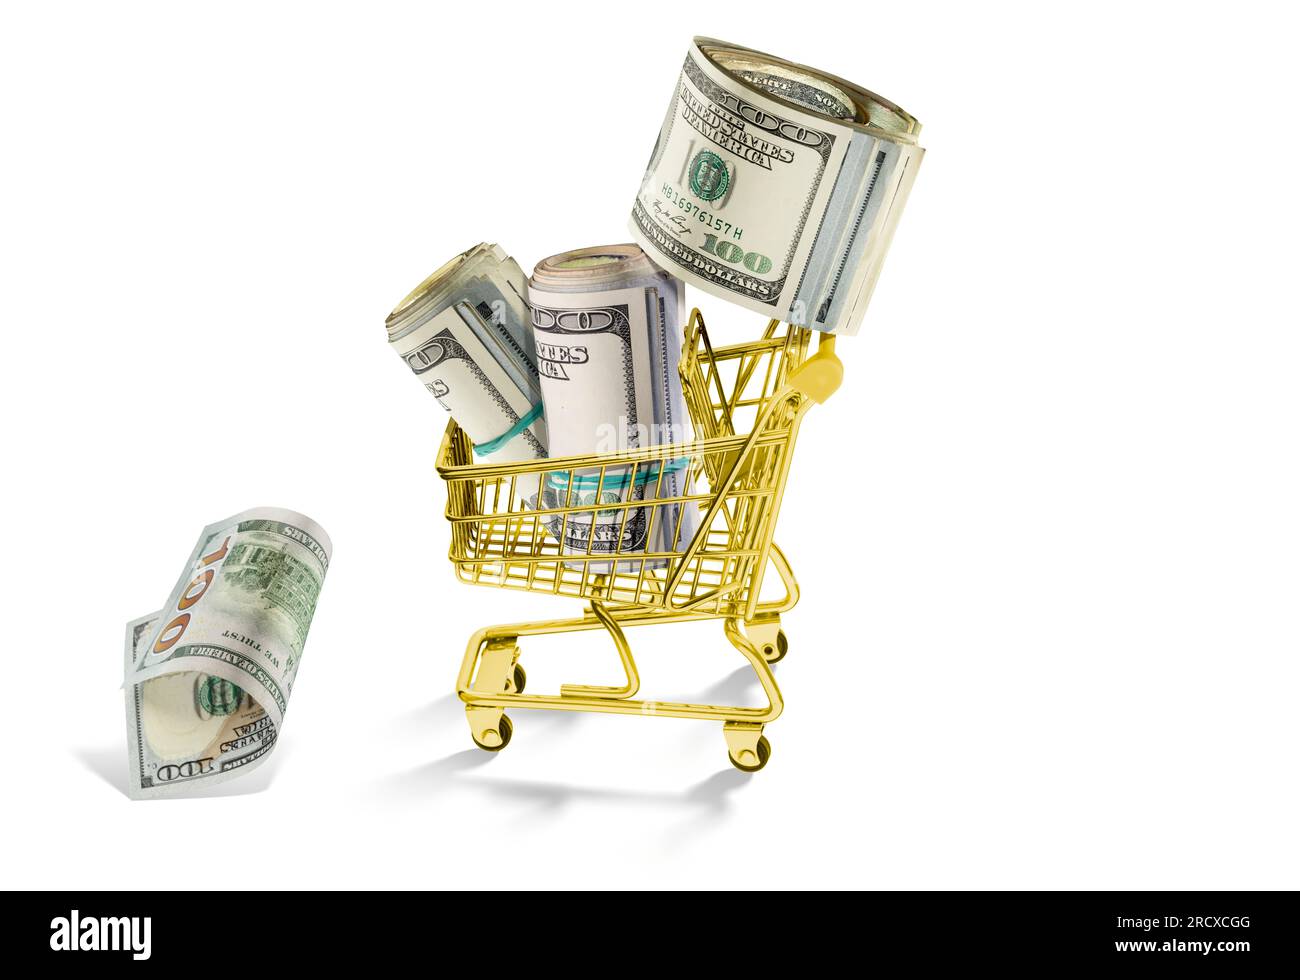 Savings and shopping expenses. Rolls of money, hundreds of dollars, in a golden basket, on a white background. Hundreds of bucks in cash. Stock Photo